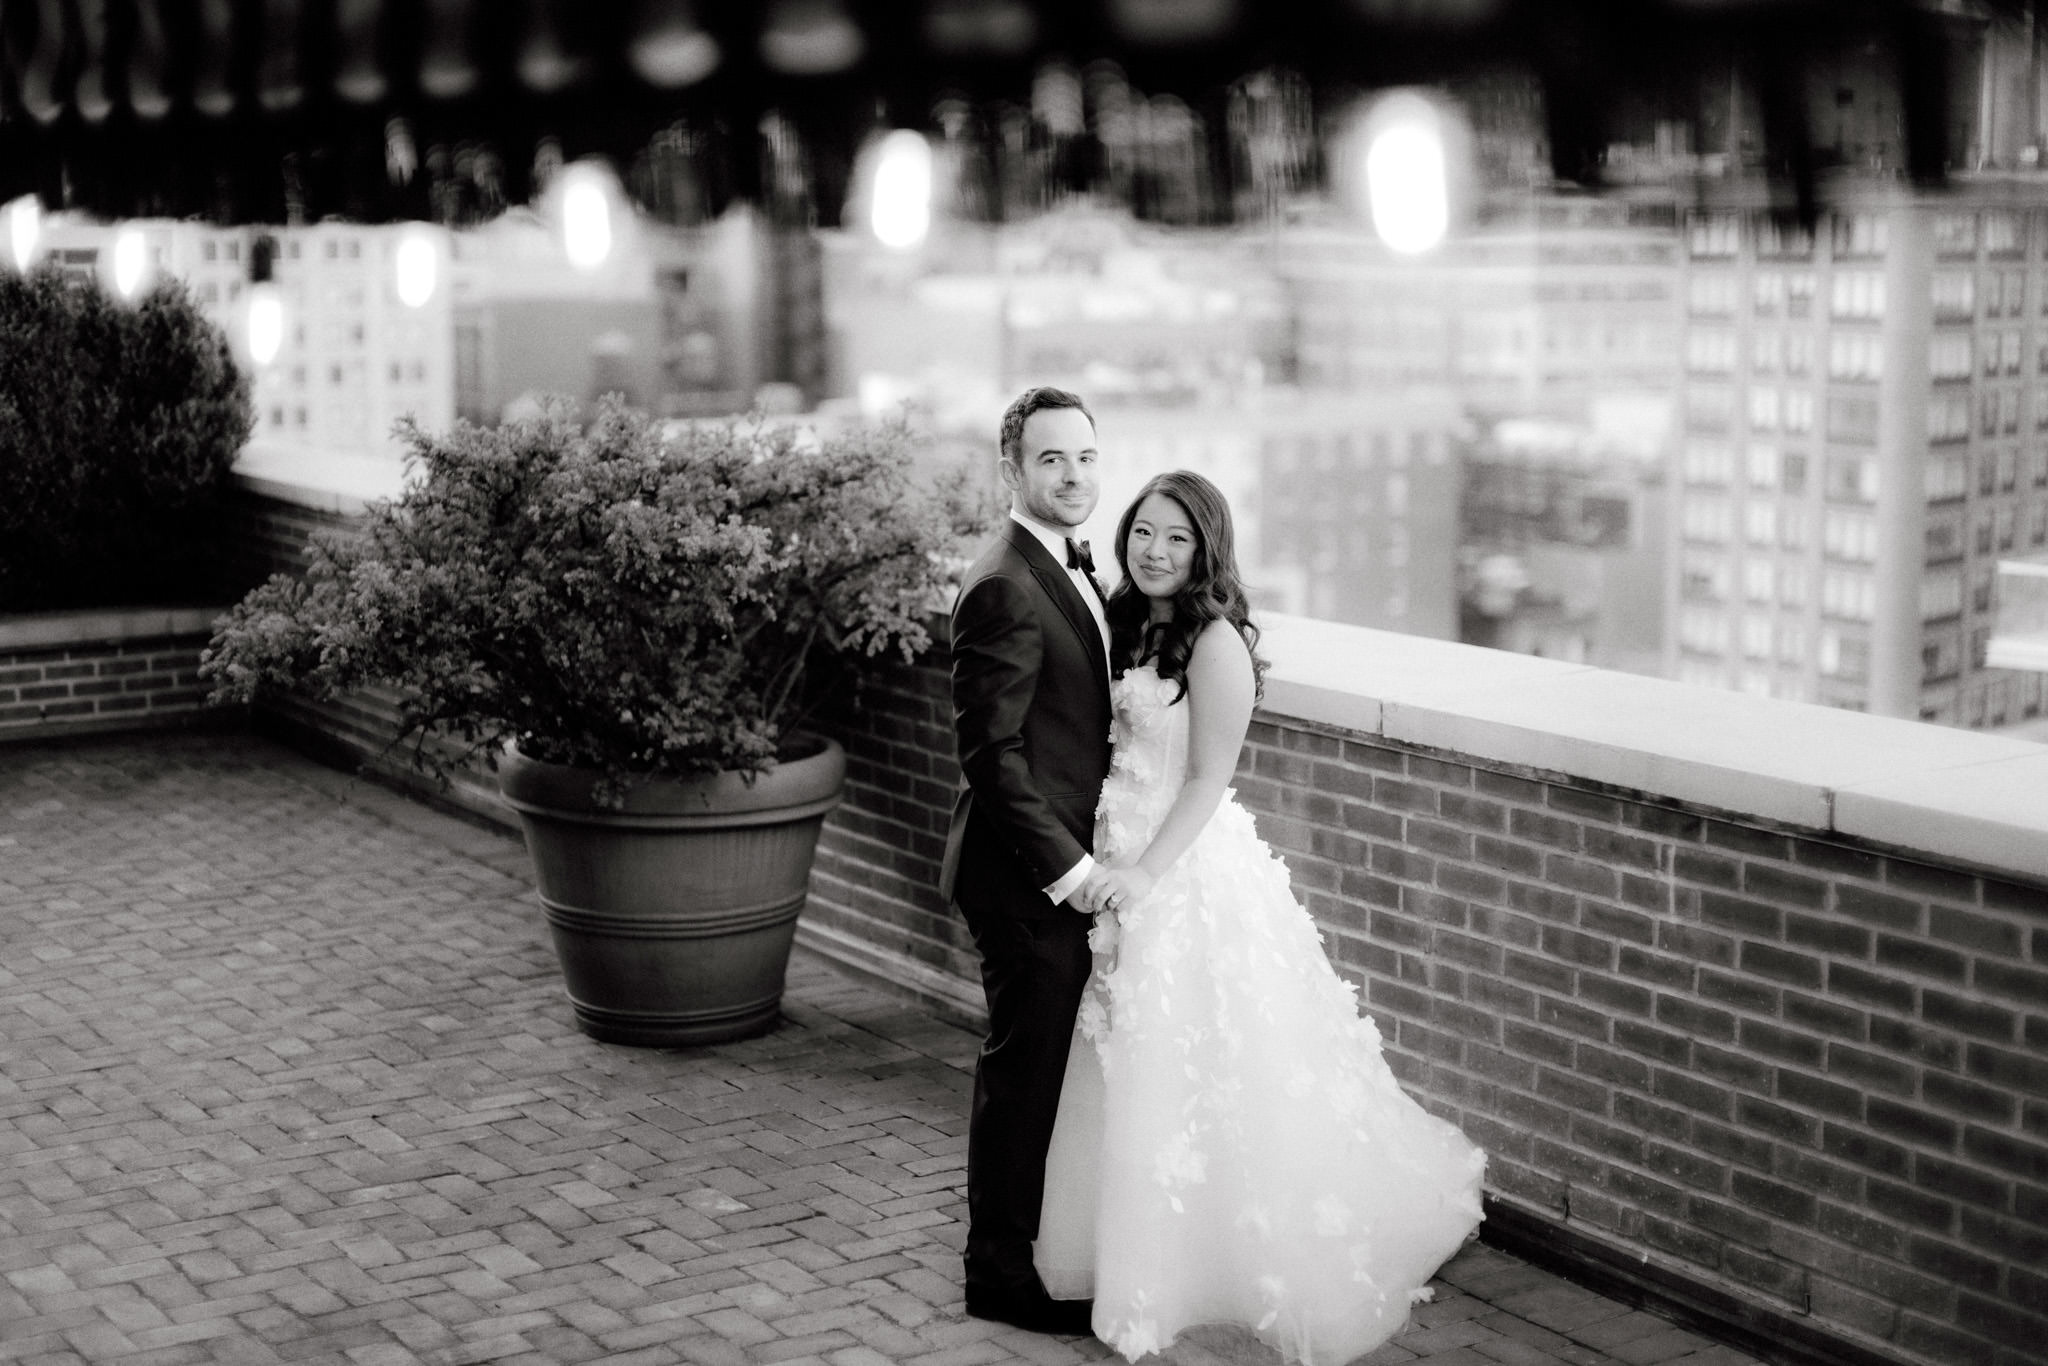 Editorial image of the bride and groom overlooking nyc's skyline. Wedding photography package image by Jenny Fu Studio